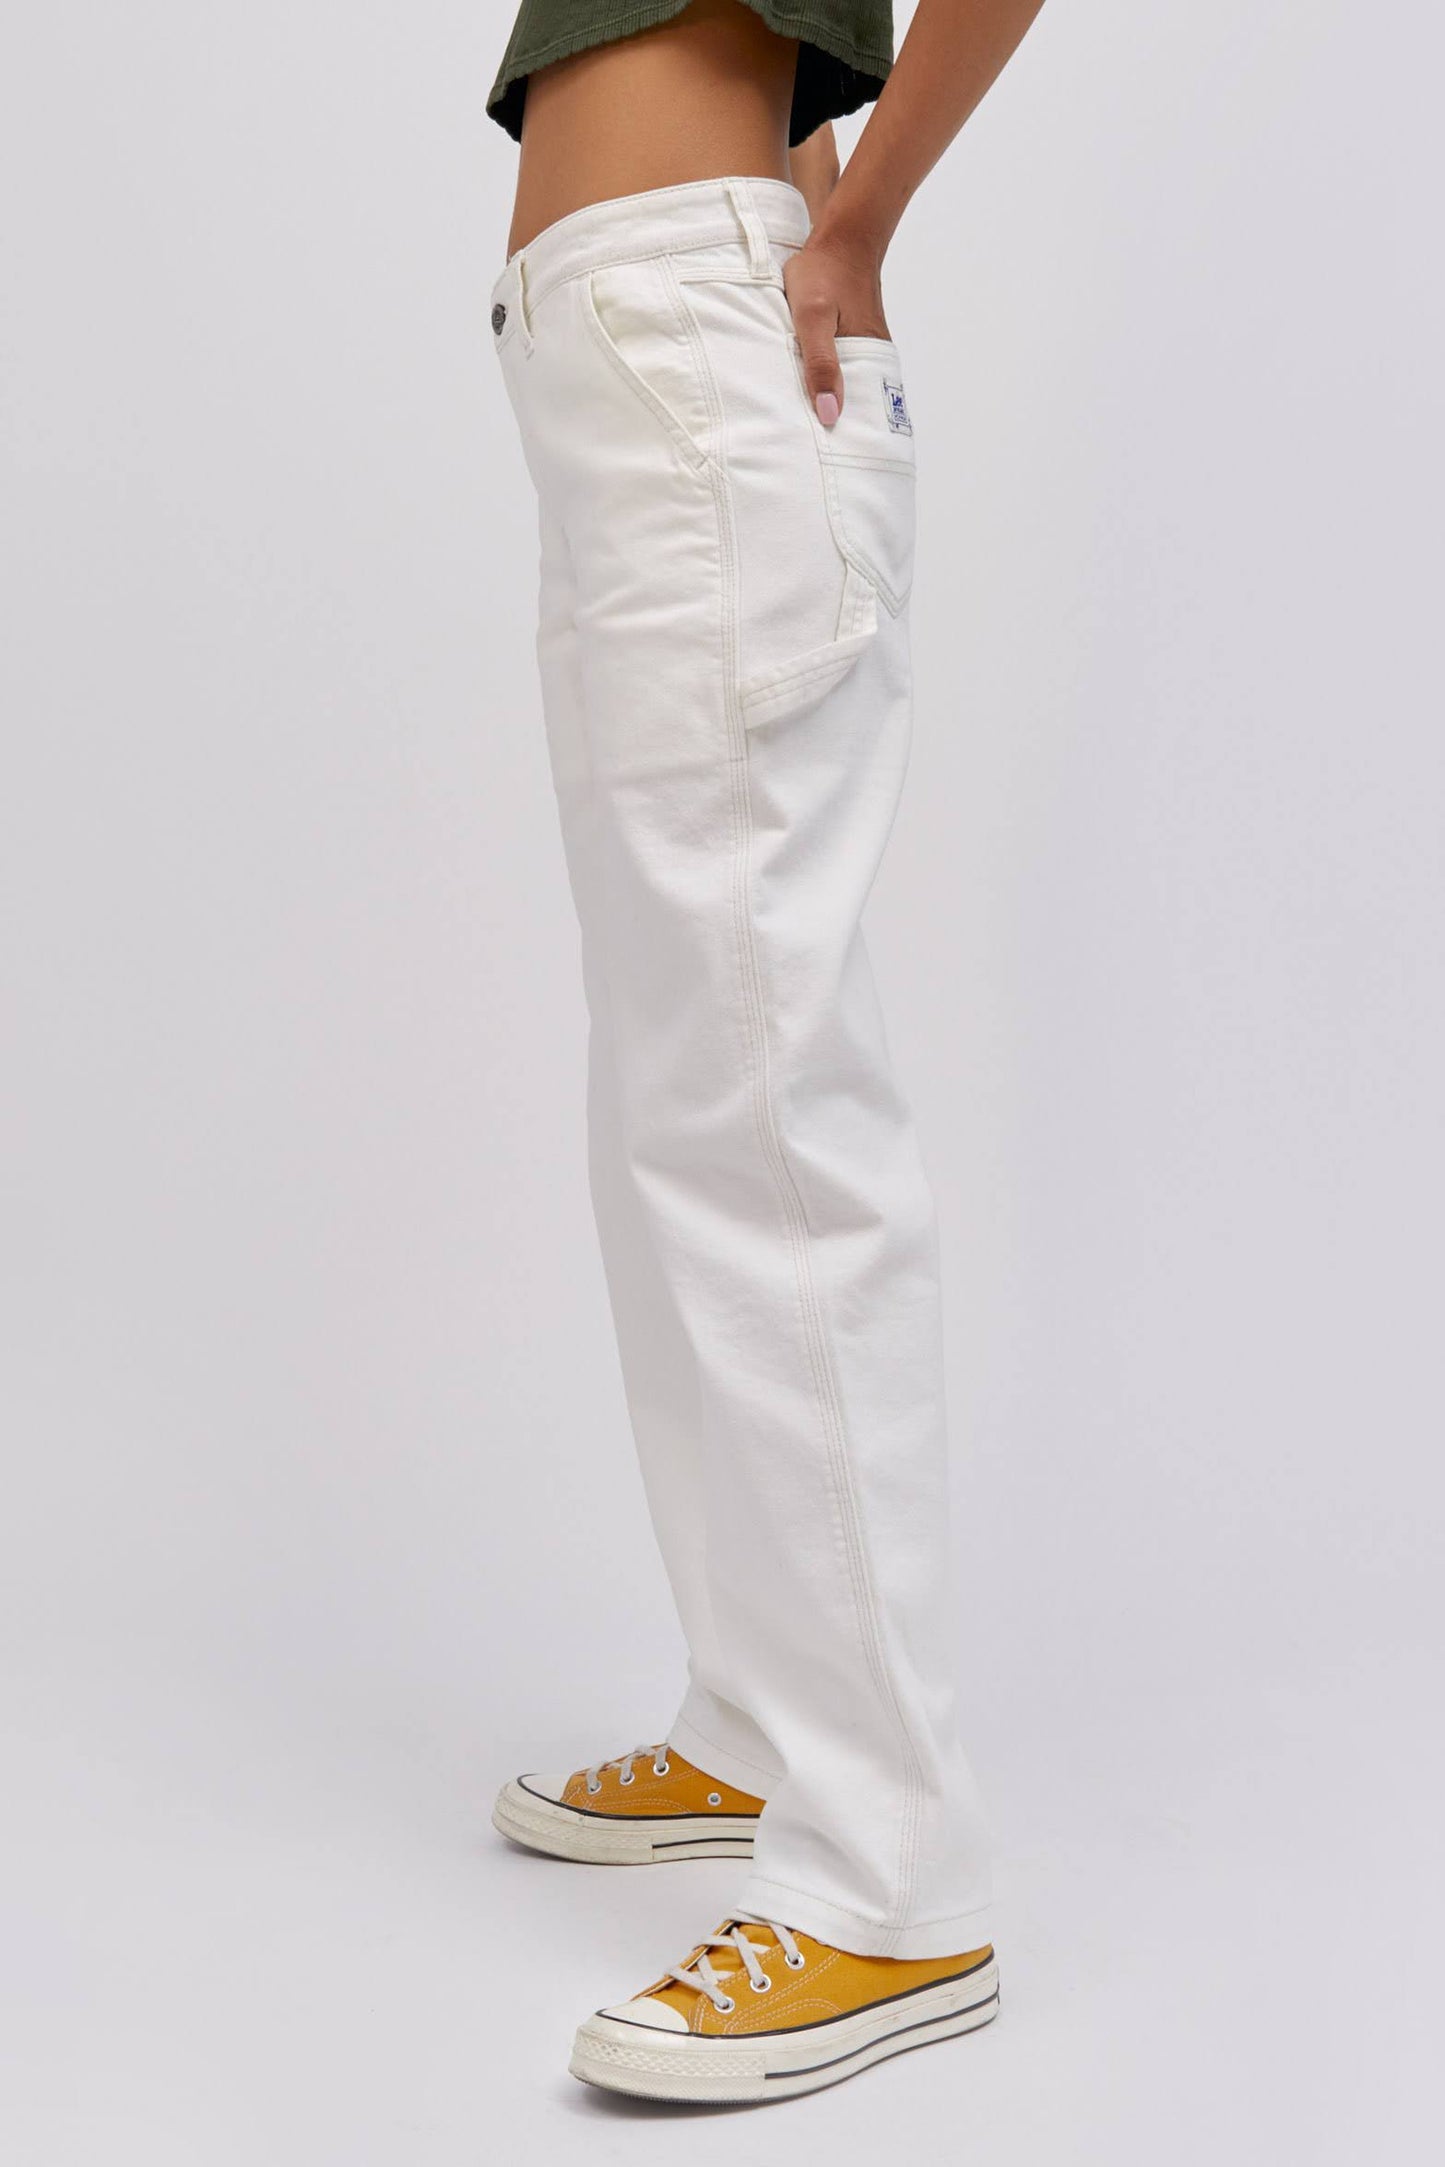 A  model featuring a white workwear pant made from heavy cotton, accented with key Lee detailing of triple-stitched seams, oversized pockets and a uniform like hammer loop.